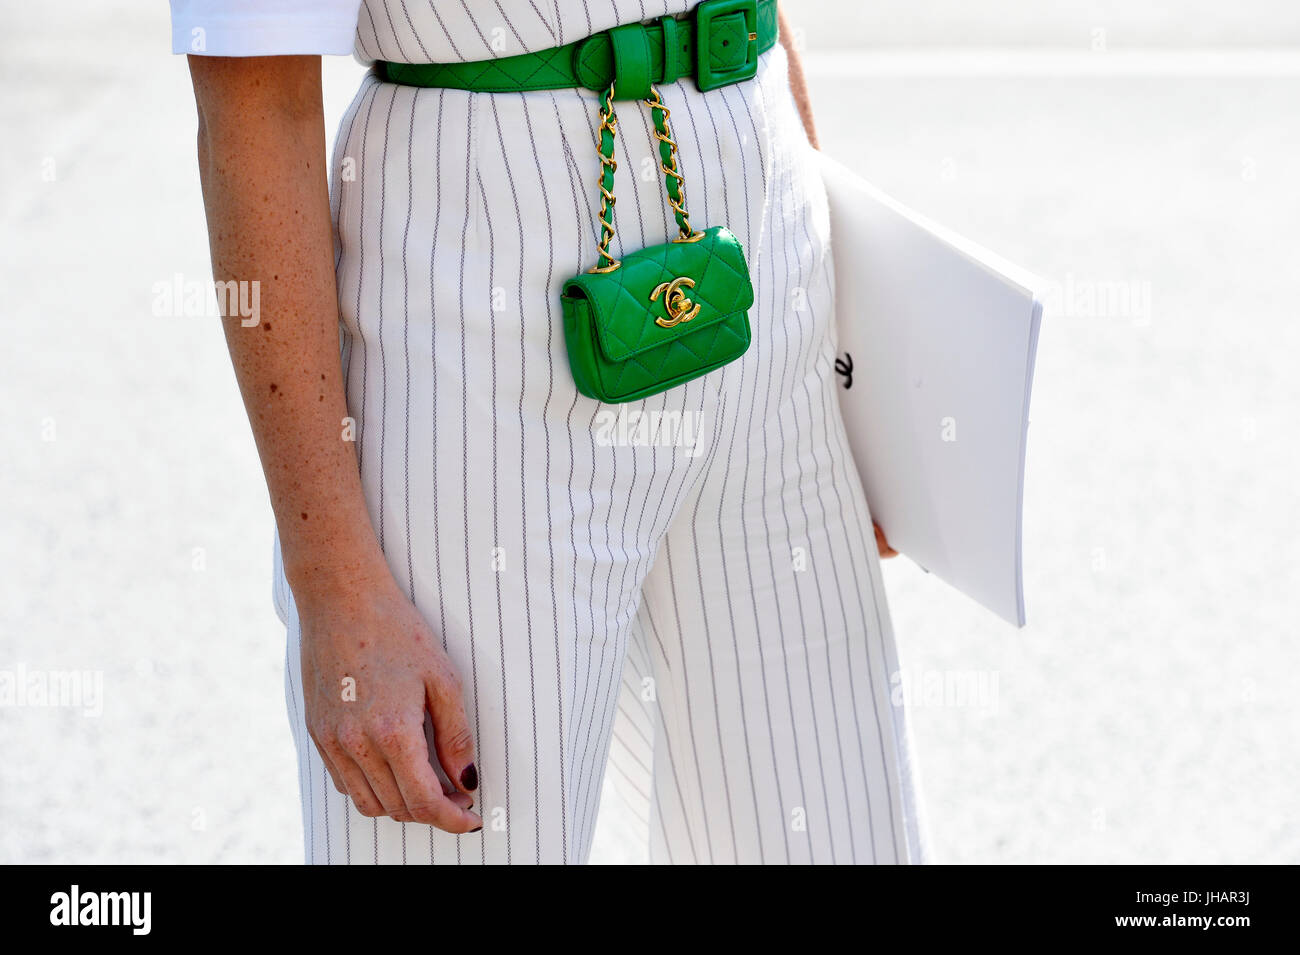 9 Designer Micro Bags You Need In Your Closet Now